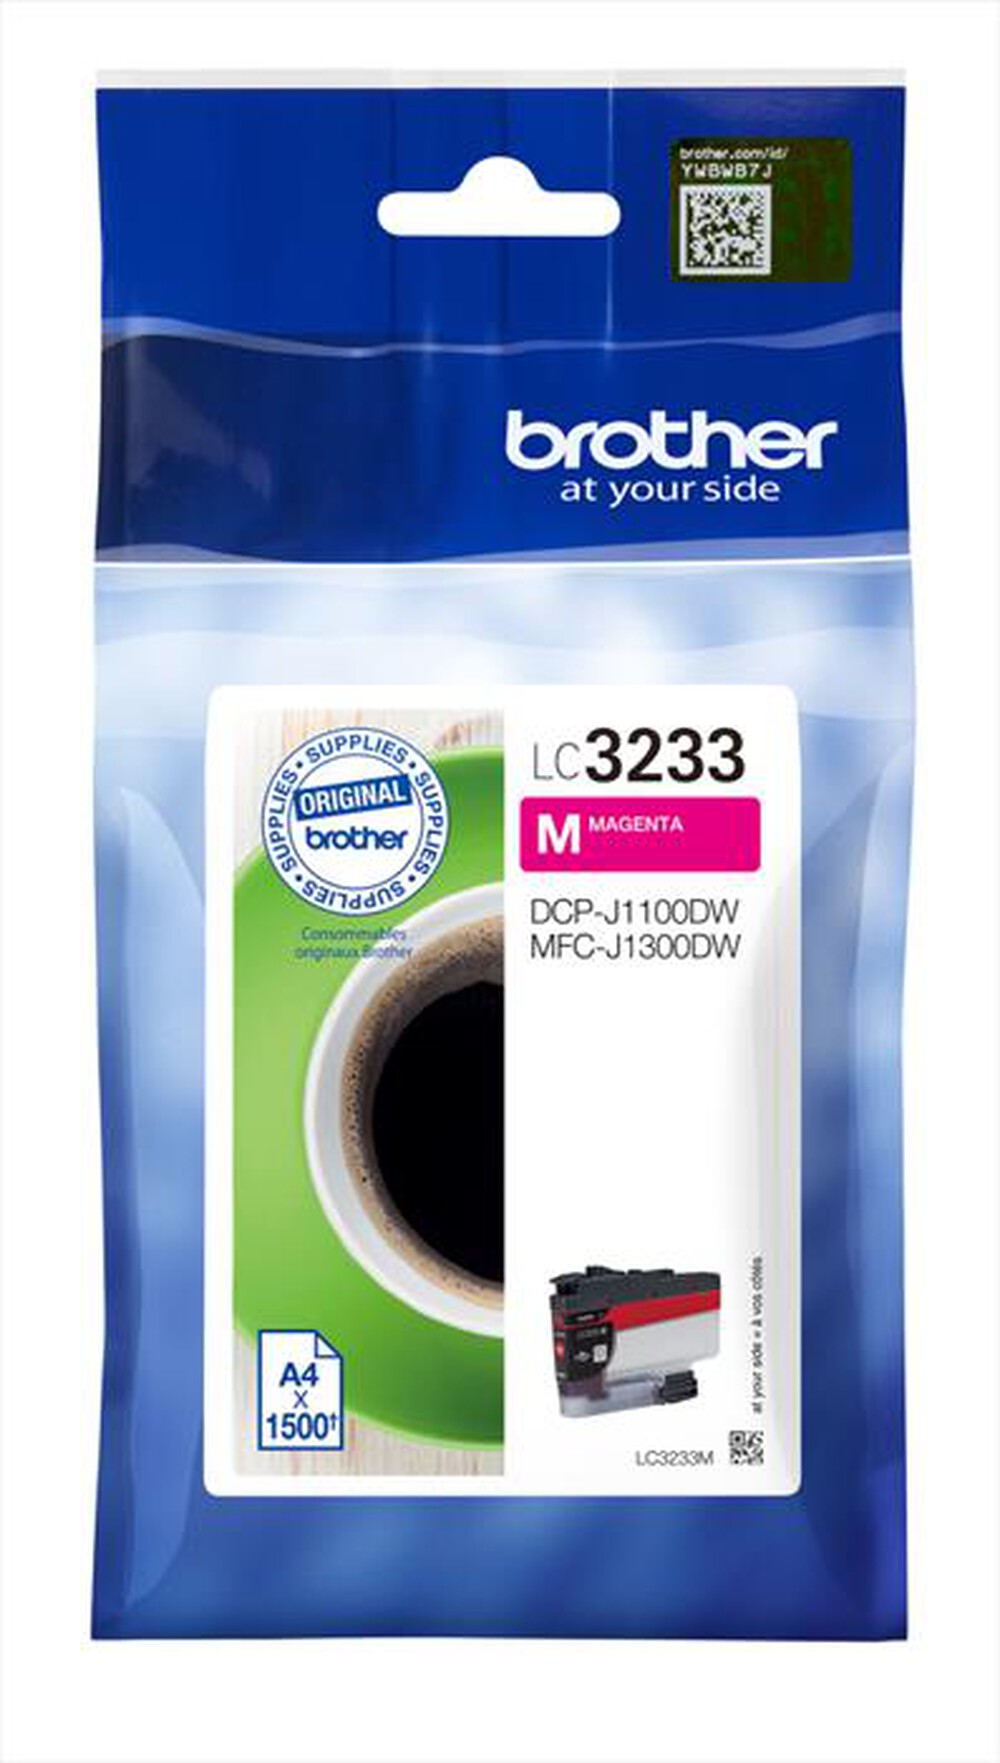 "BROTHER - LC3233M"